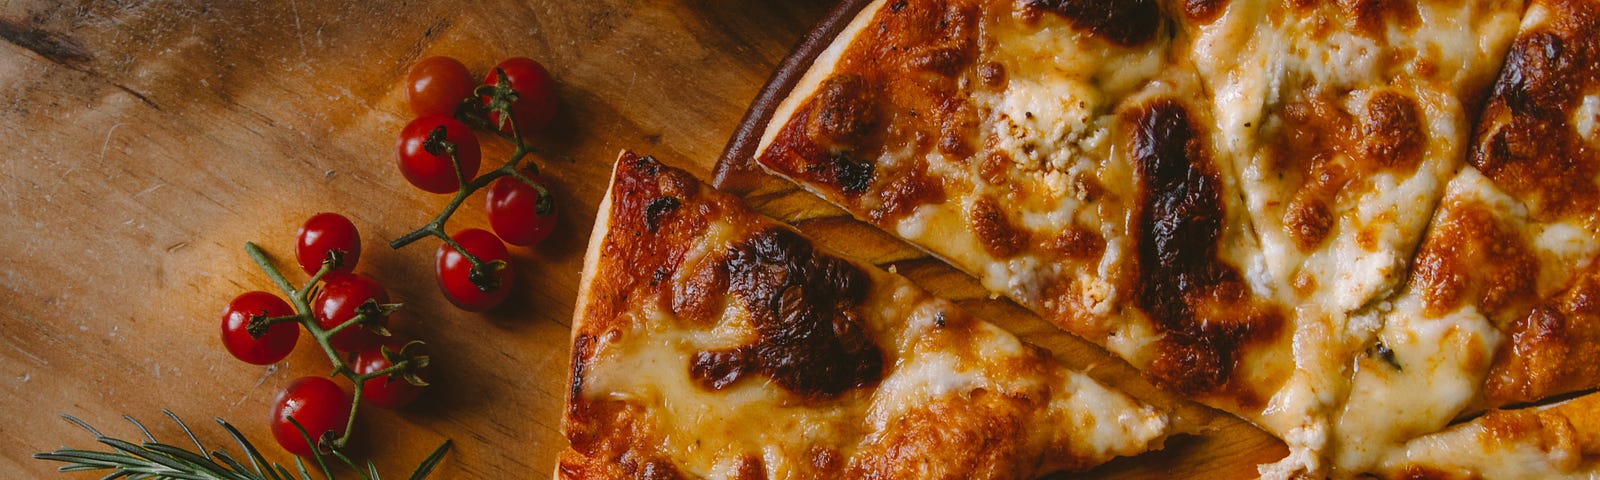 Splash image of delicious pizza. Because that’s all fractions are good far, as far as I can tell.